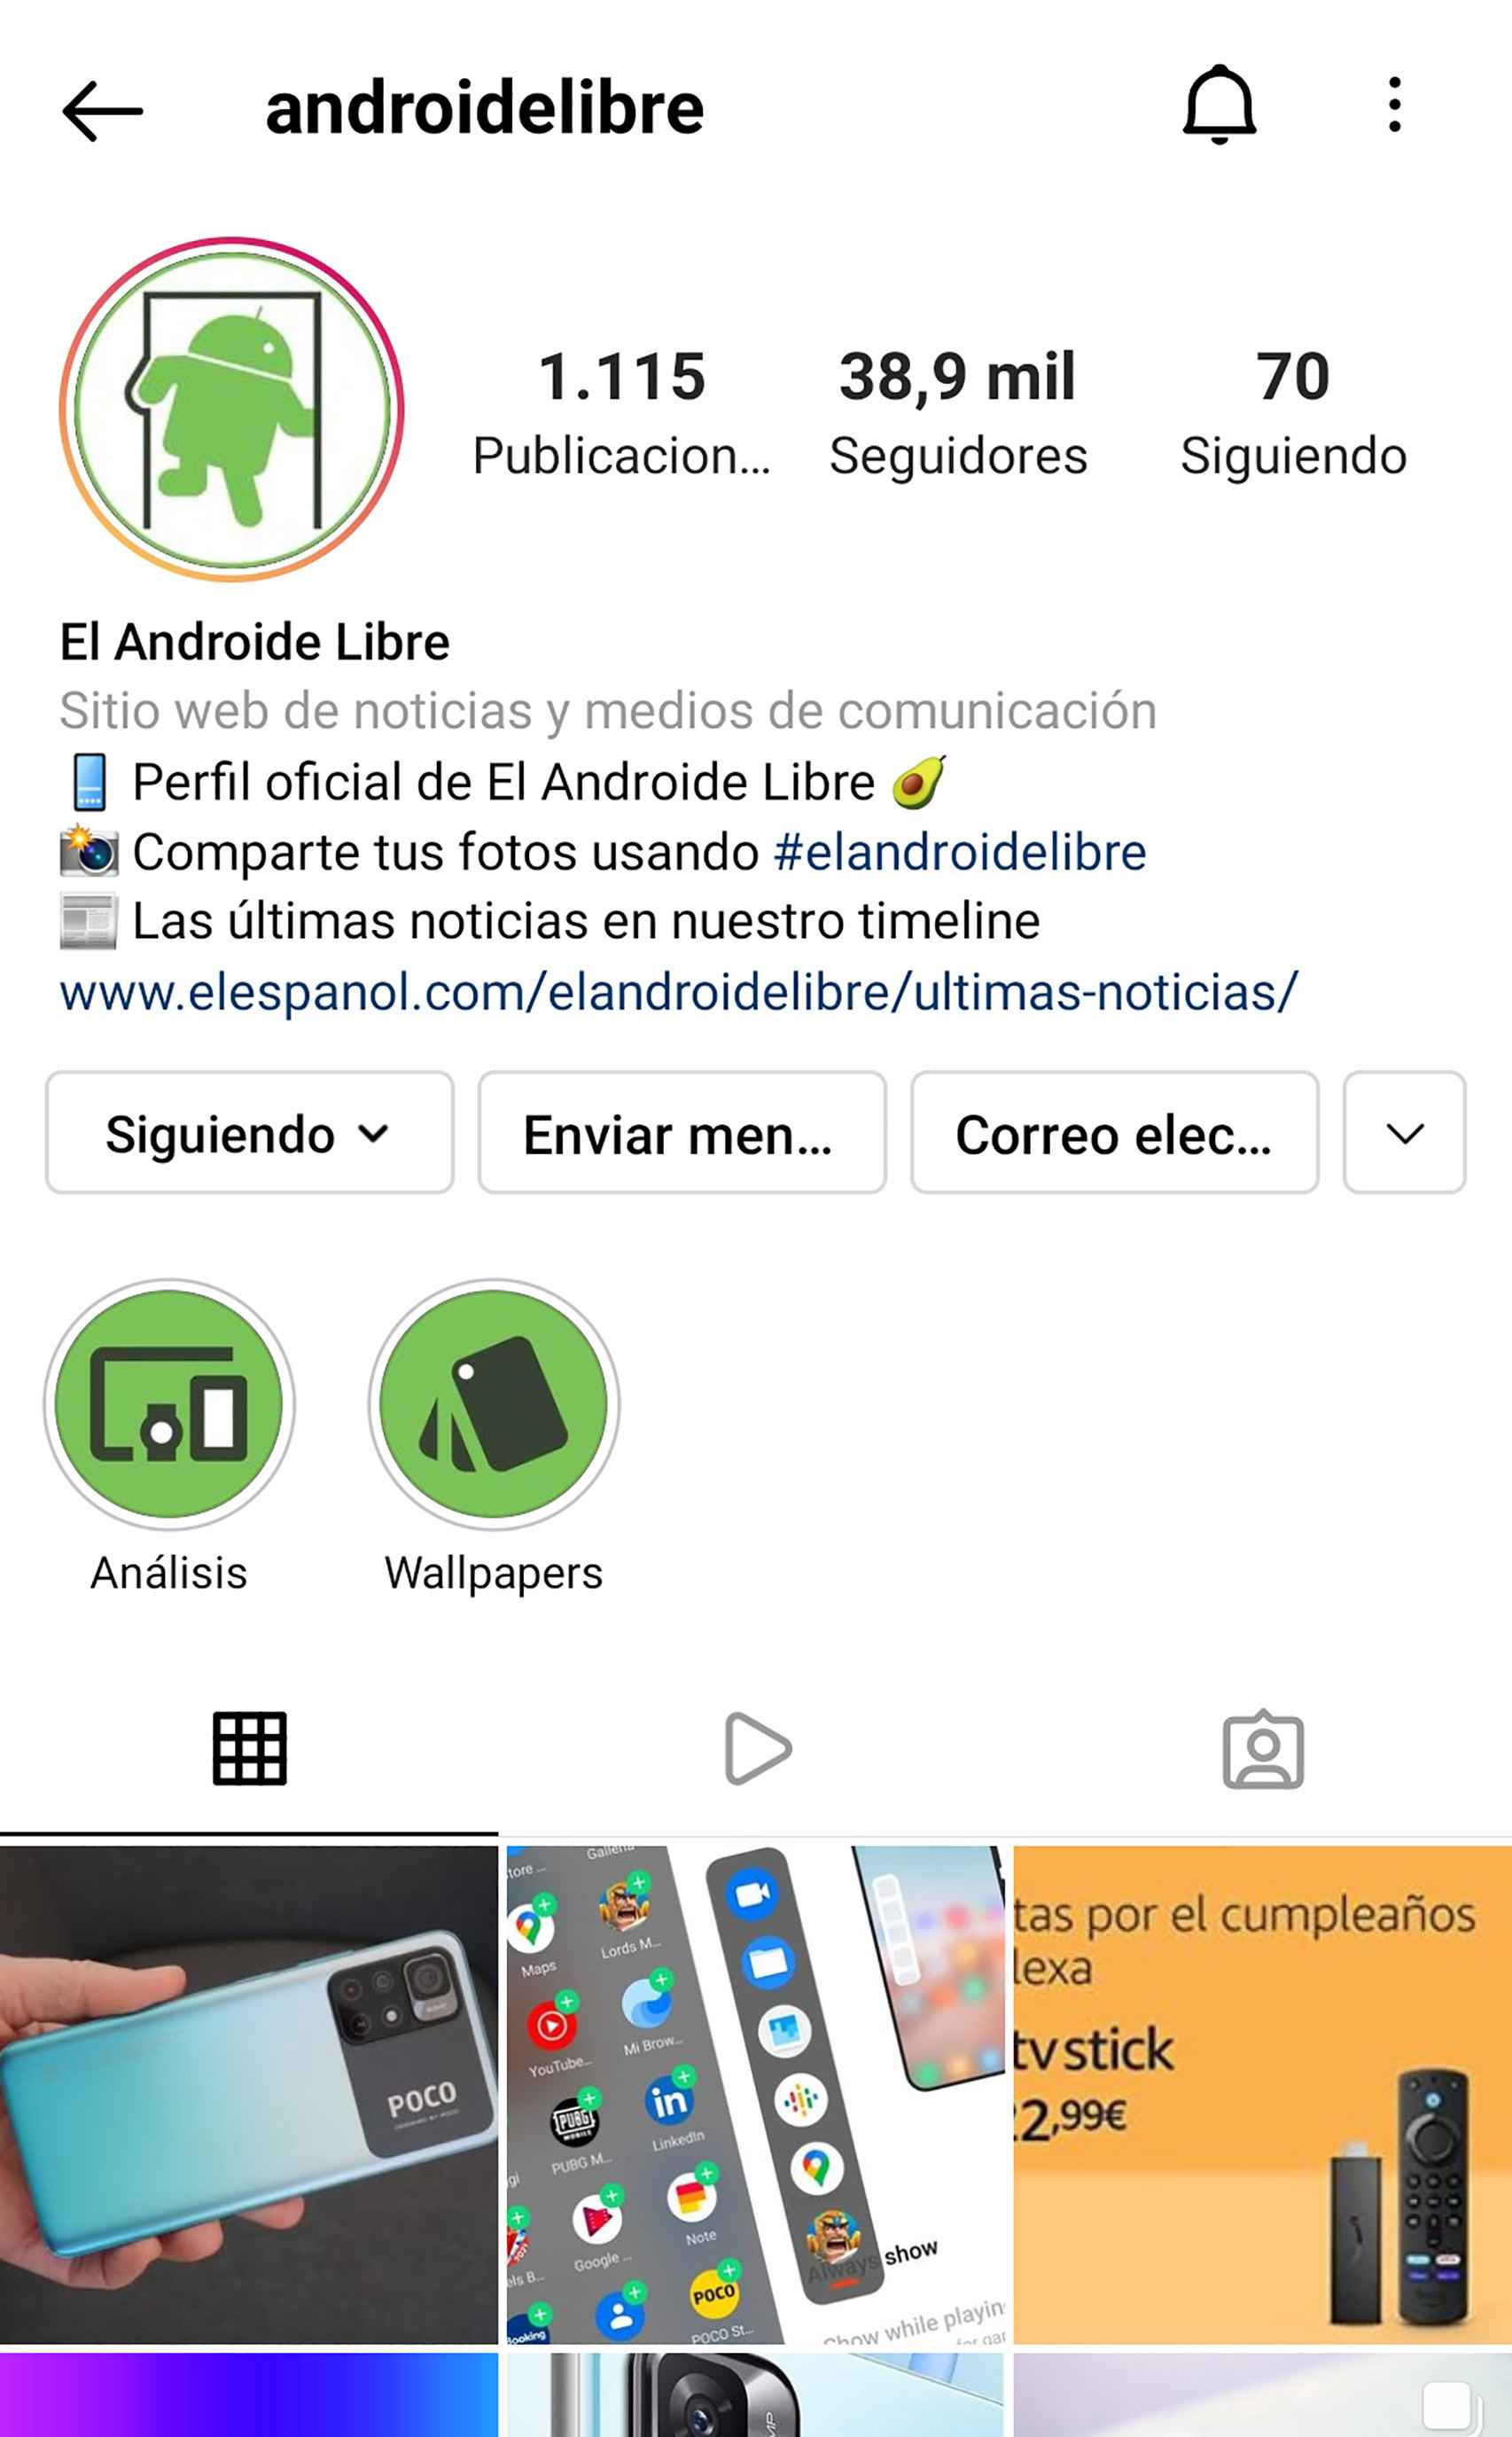 Profile of The Free Android on Instagram